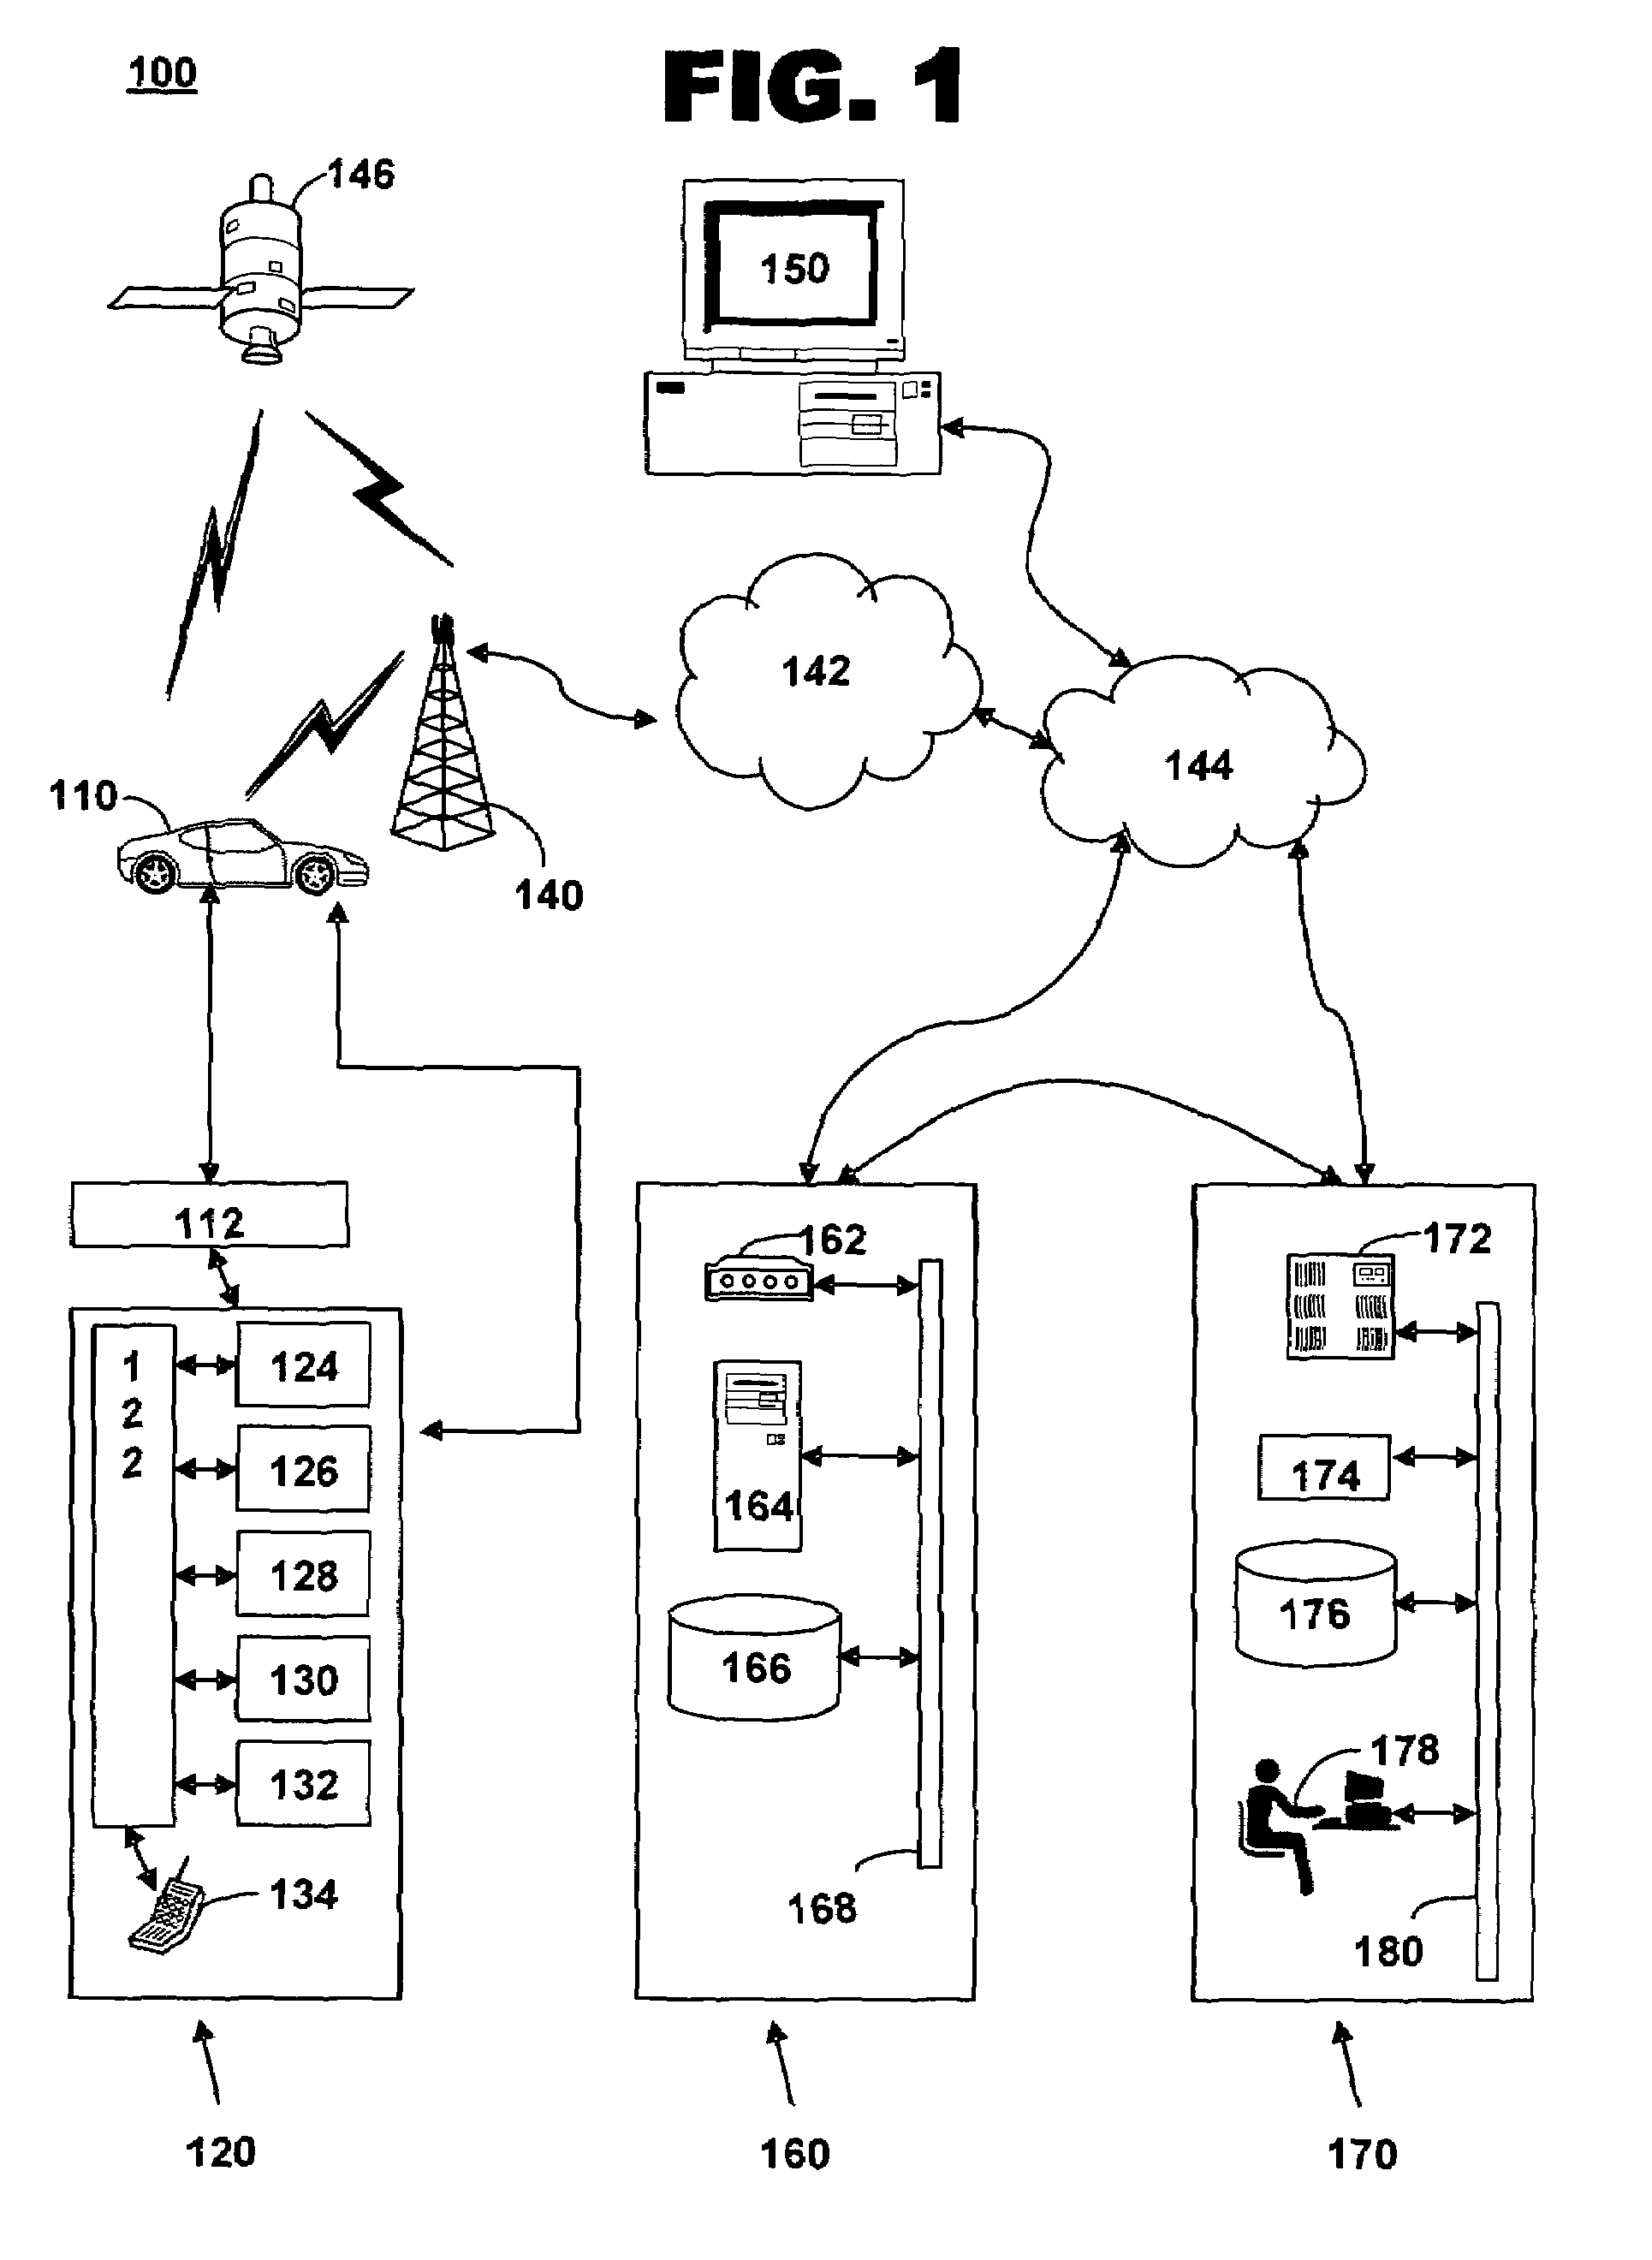 System and method for large route data handling within a telematics communication system